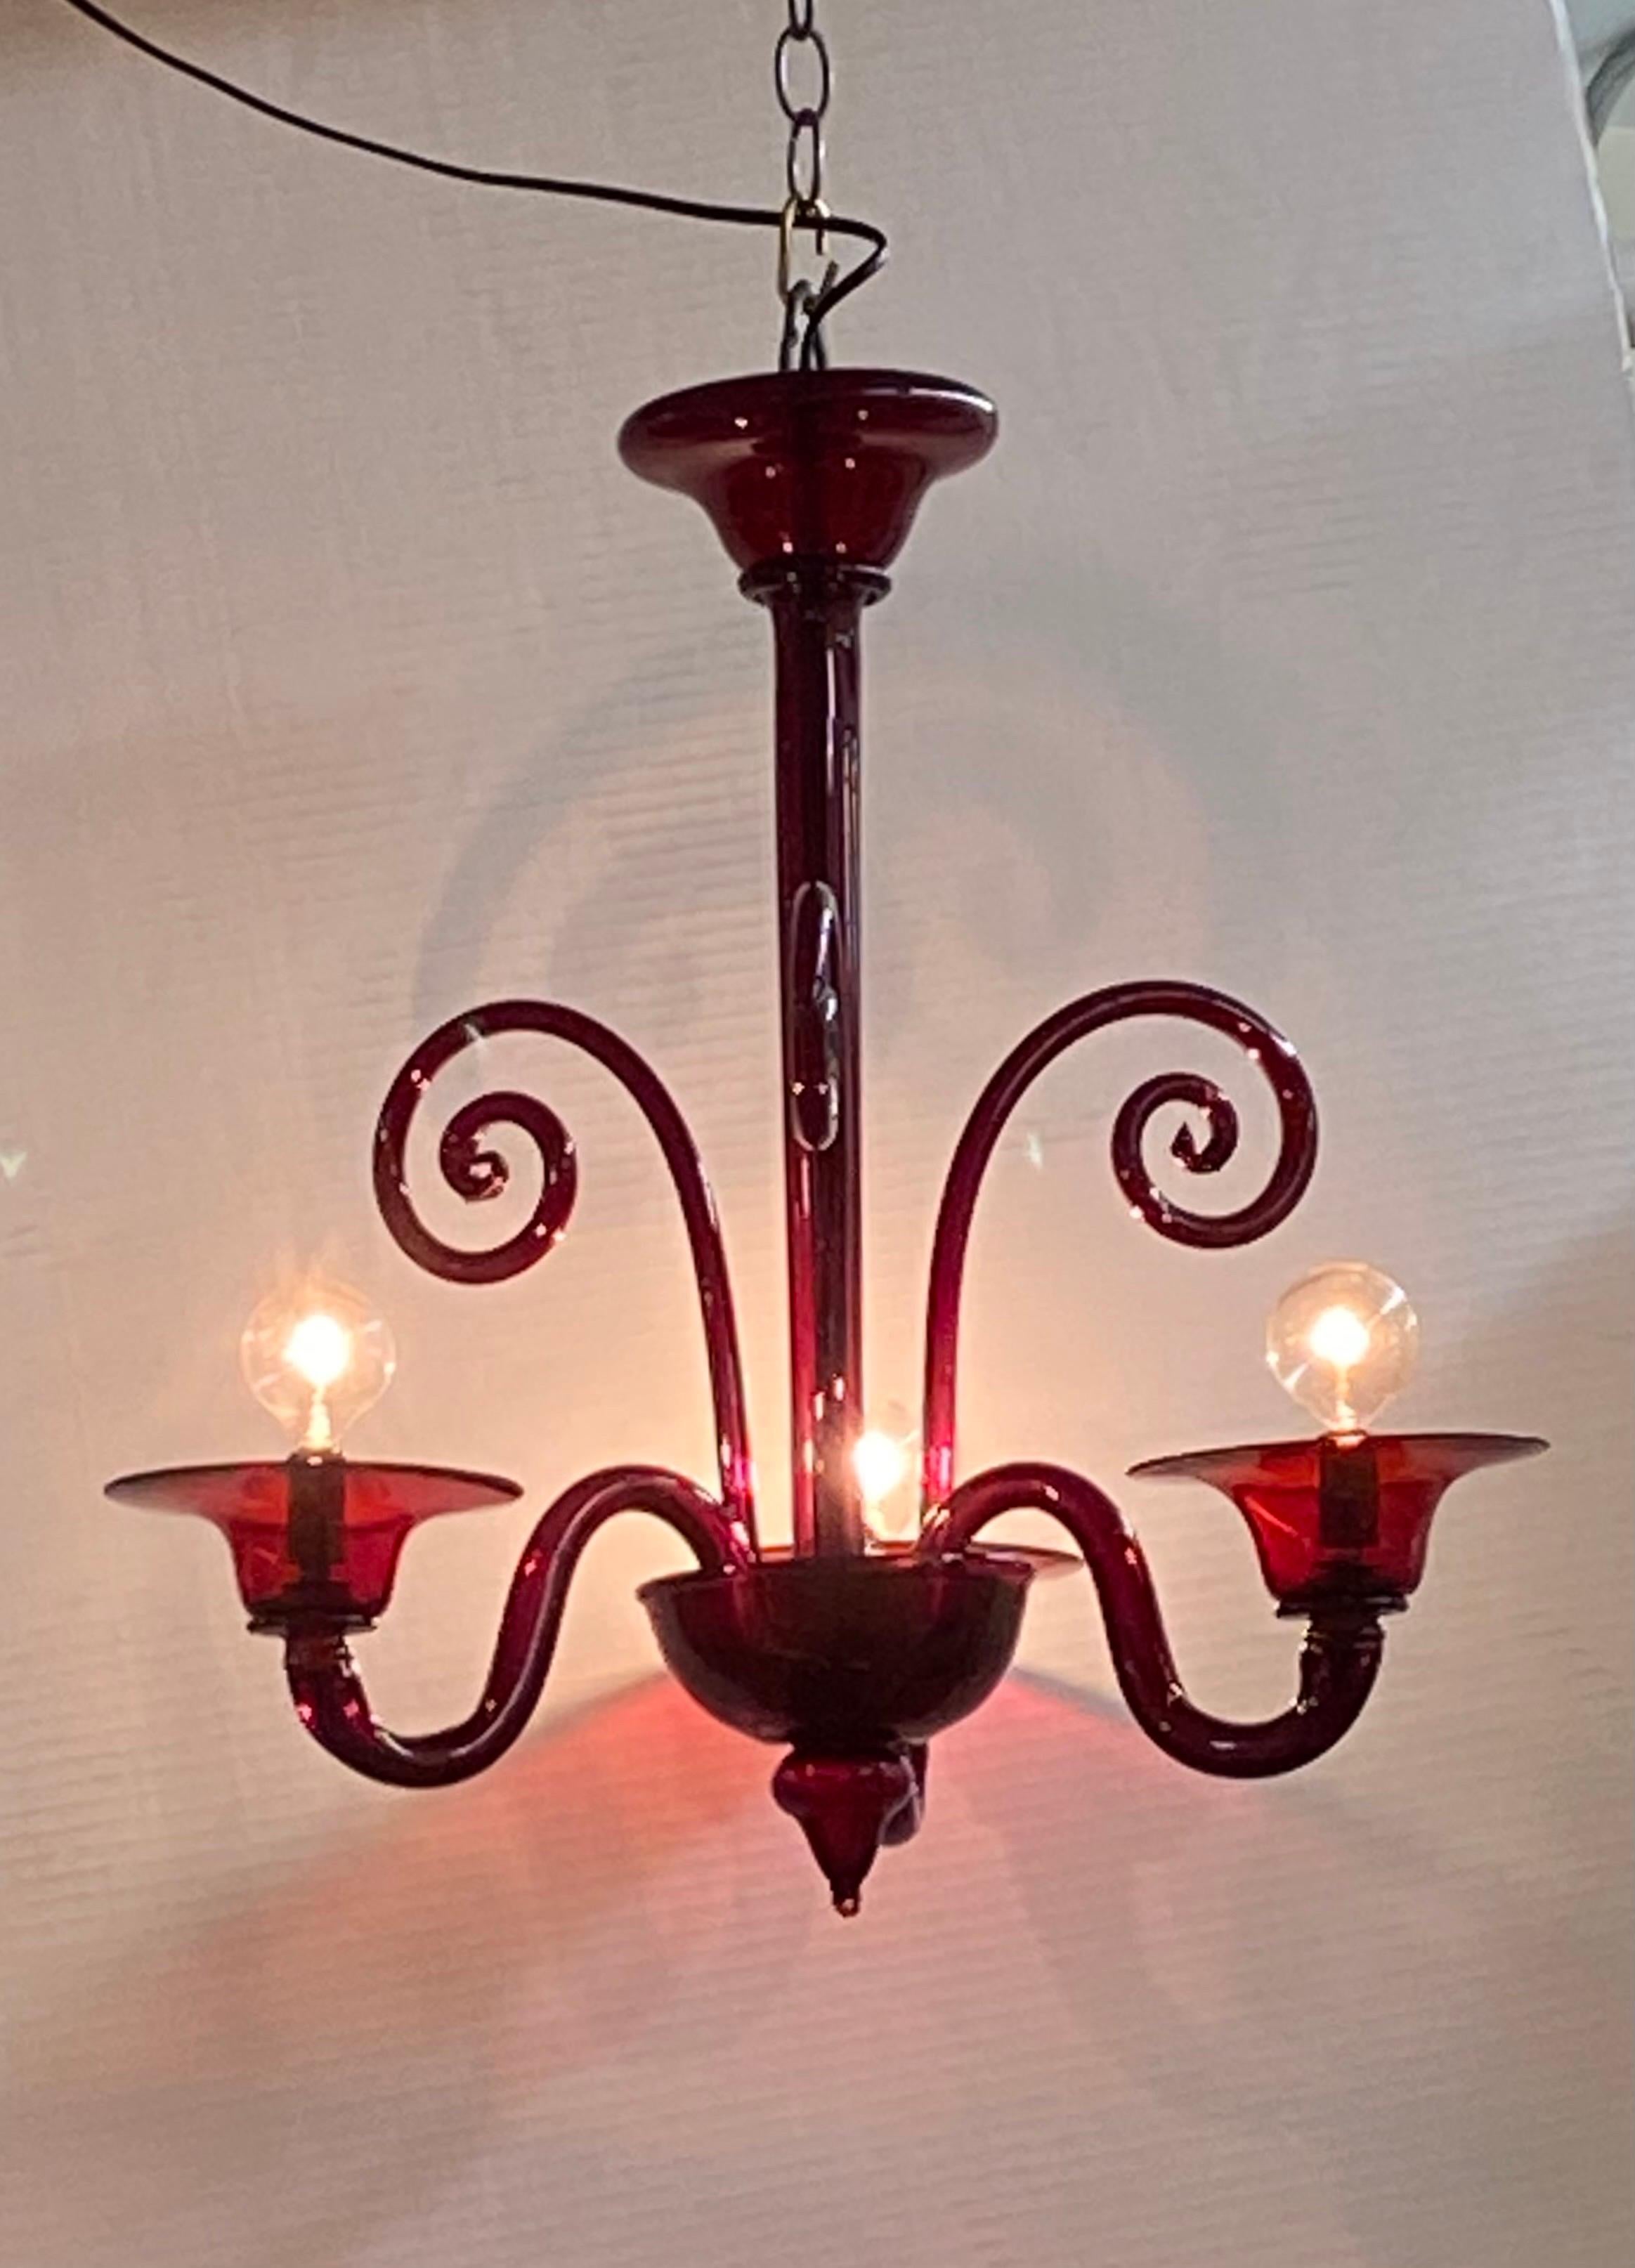 A charming petite 1950s Venetian chandelier of hand blown glass in a stunning burgundy red color. The chandelier has three arms with each holding a candelabra socket alternating with three decorative tall rods ending in a spiral. The chandelier is